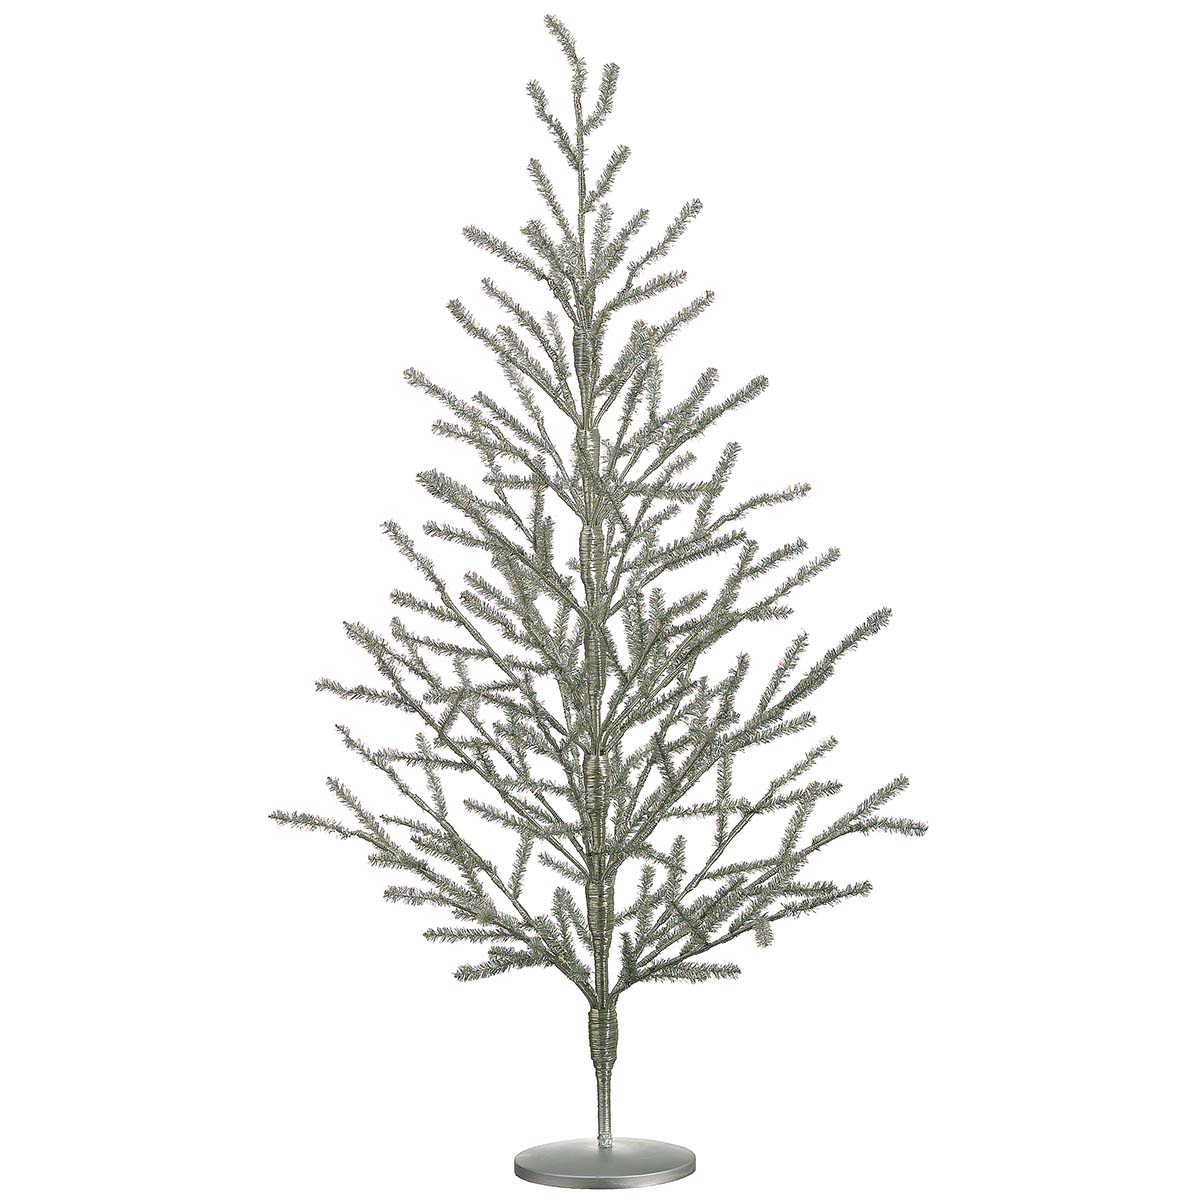 Allstate Floral | Floral Christmas Trees | Allstate Garland | Wreaths